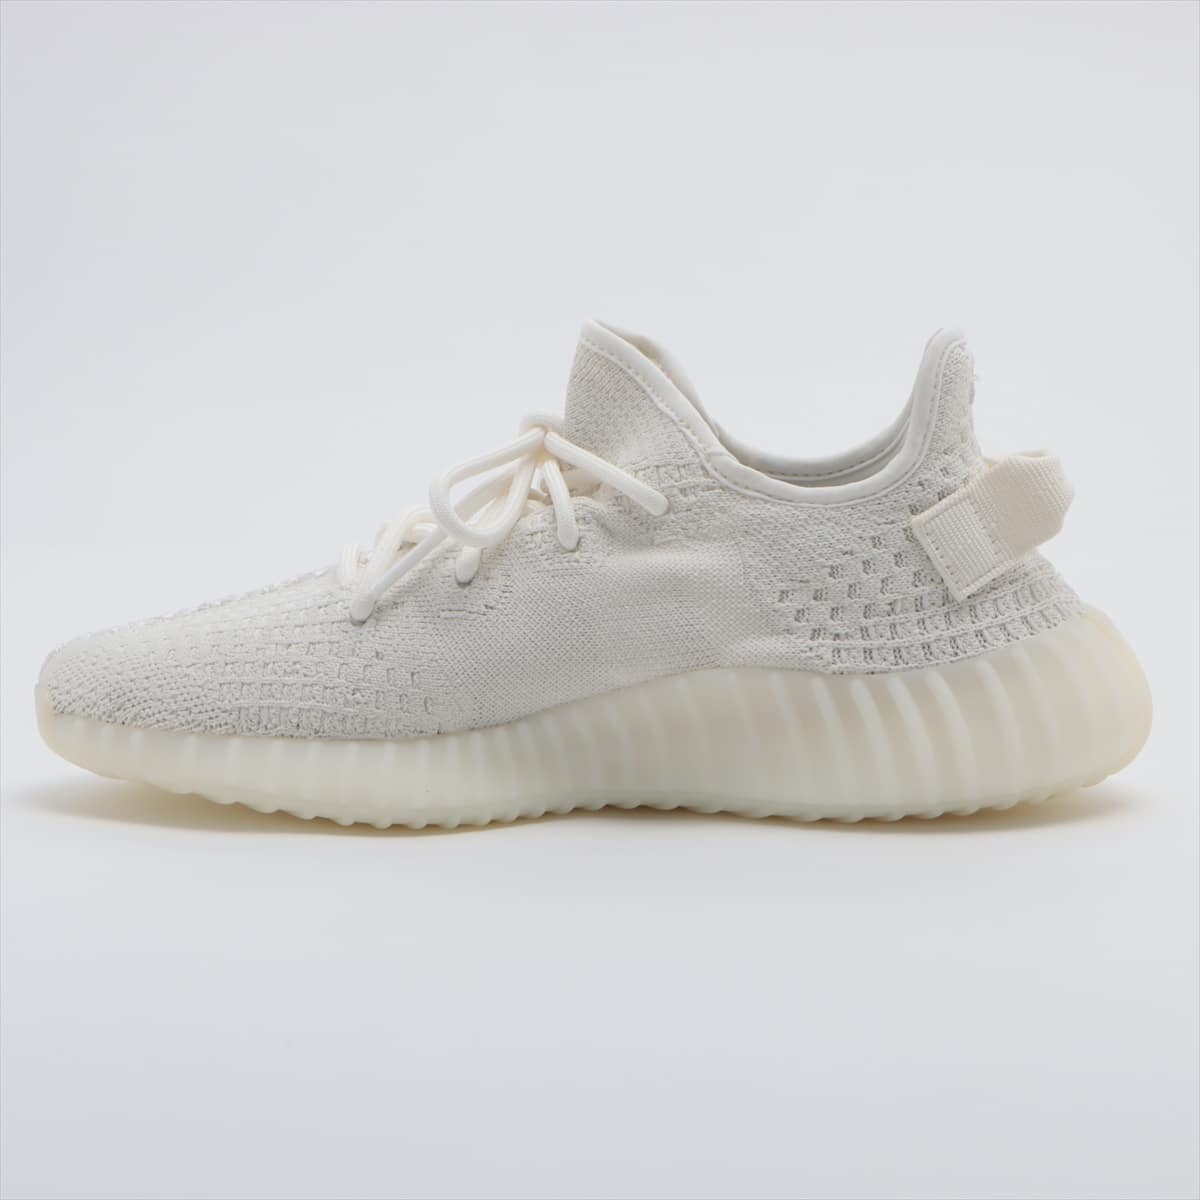 adidas x Kanye West YEEZY BOOST 350 V2 Knit Sneakers 26㎝ Men's White Pure Oat Bone HQ6316